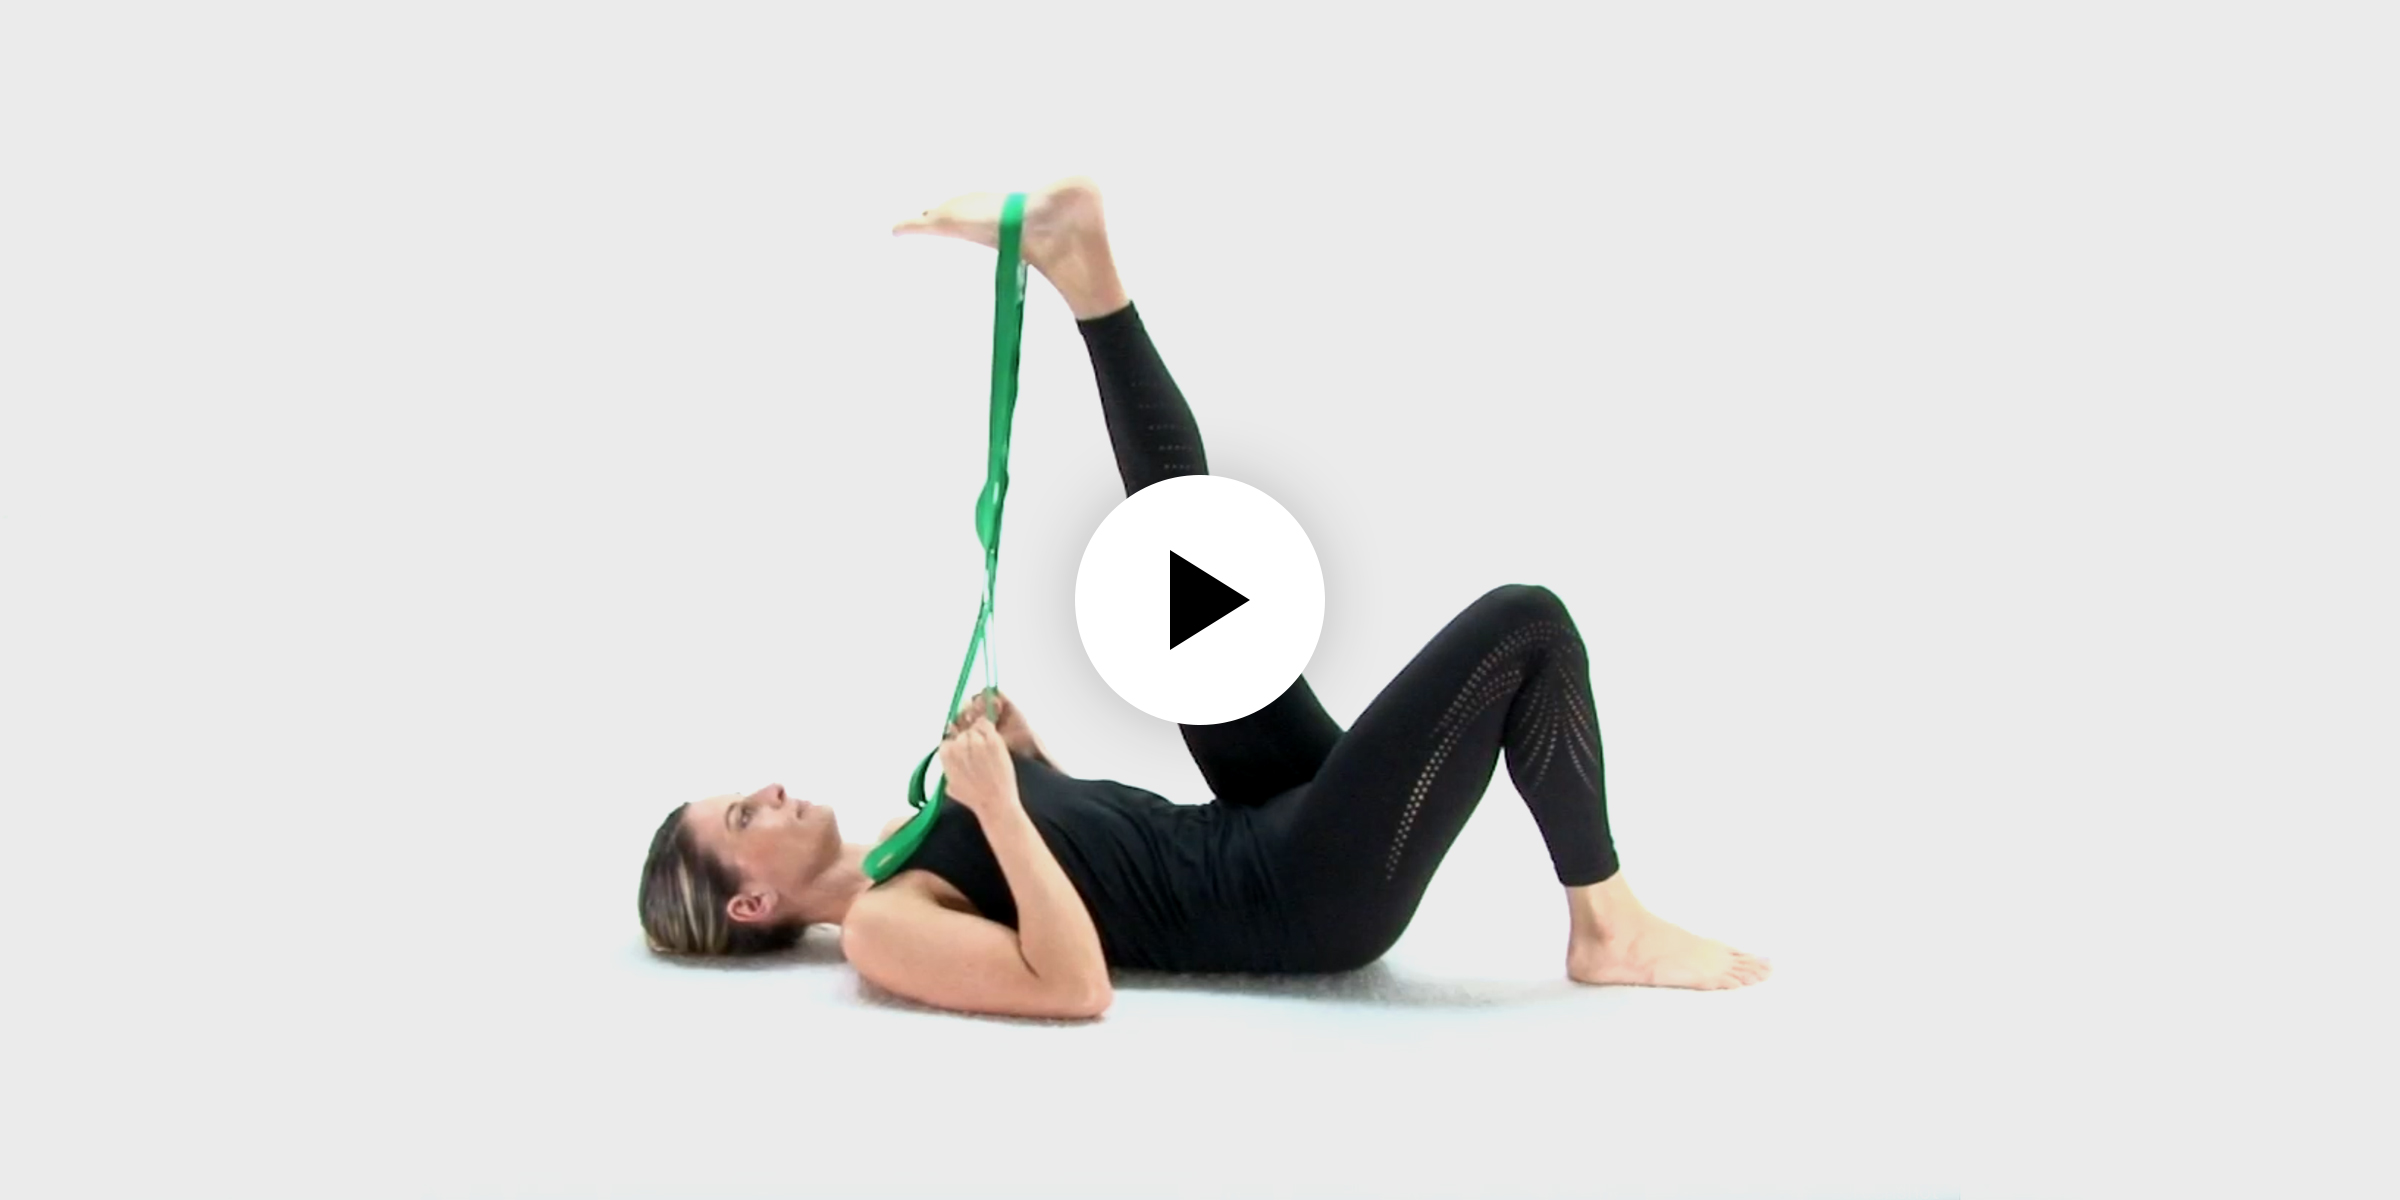 OPTP Green Extra Long Exercise Stretch Out Strap With Stretching